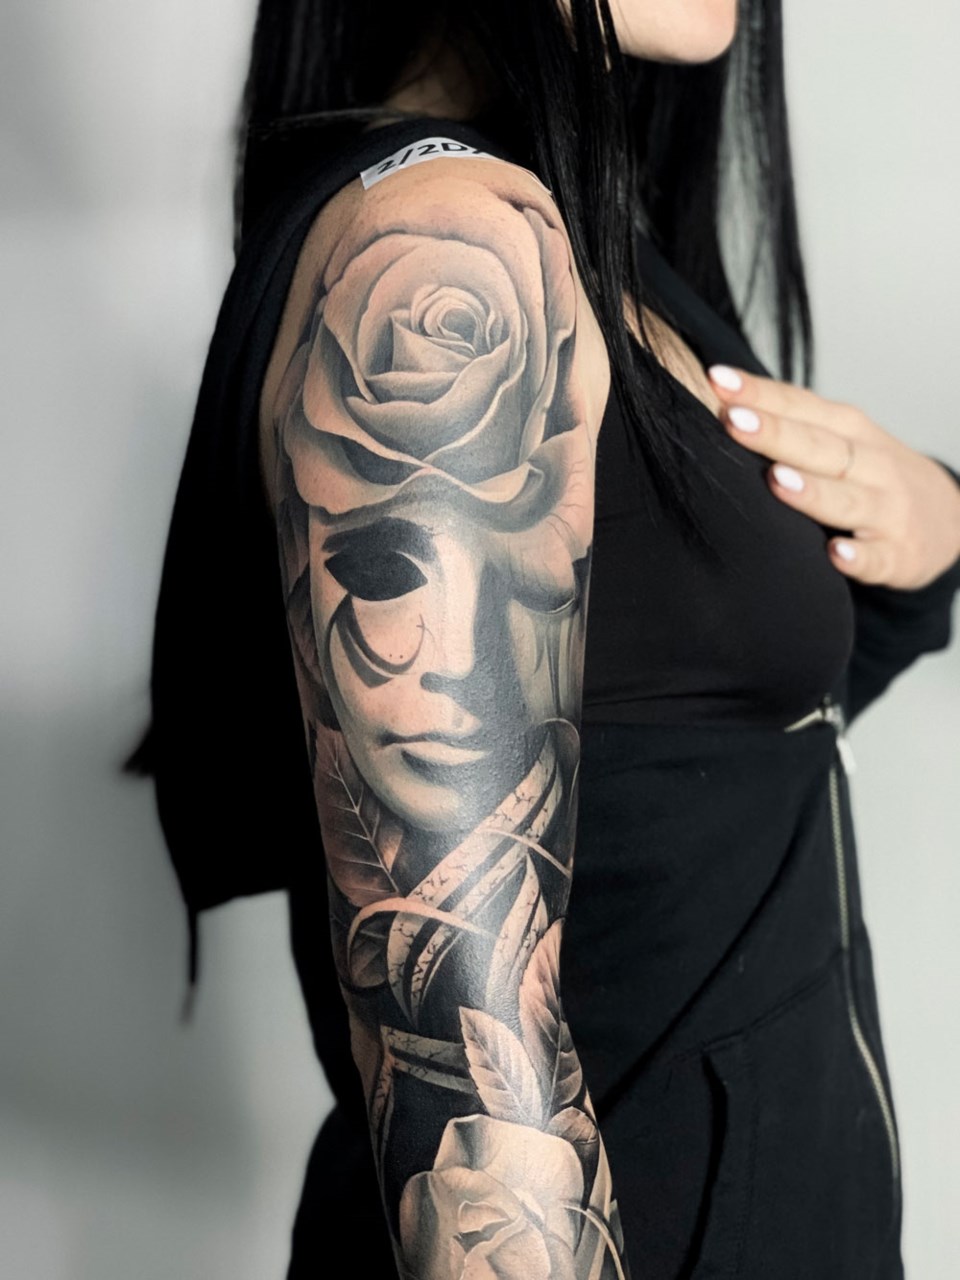 thefall-hanna-face-mask-tattoo-sleeve-shoulder-close-up